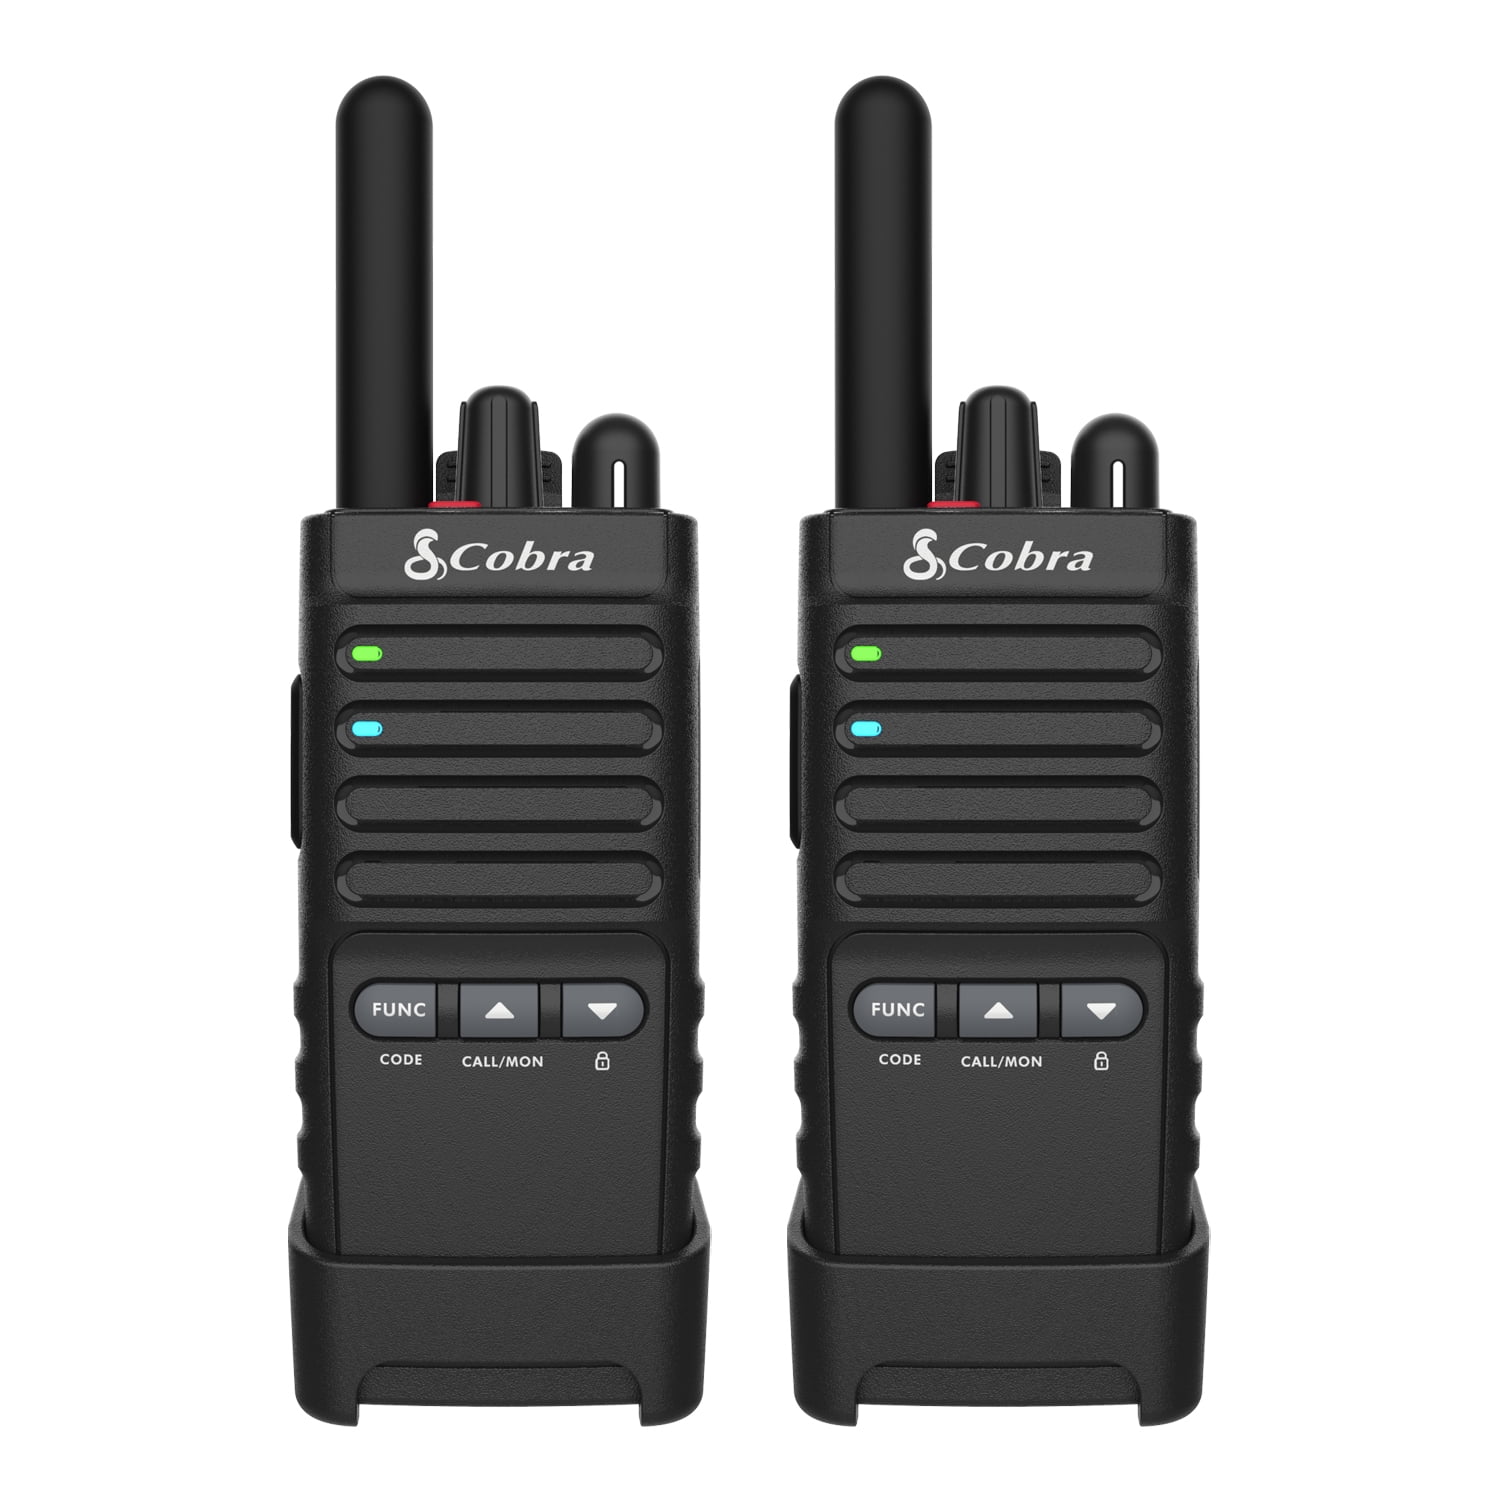 Cobra PX655 Pro Business 2W FRS Two Way Radios (Pair) IPX4 Certified Waterproof Walkie Talkies | Up to 42 Mile and up to 300,000 Sq Ft. and 25 Floor Range | 22 Channels with Privacy Codes